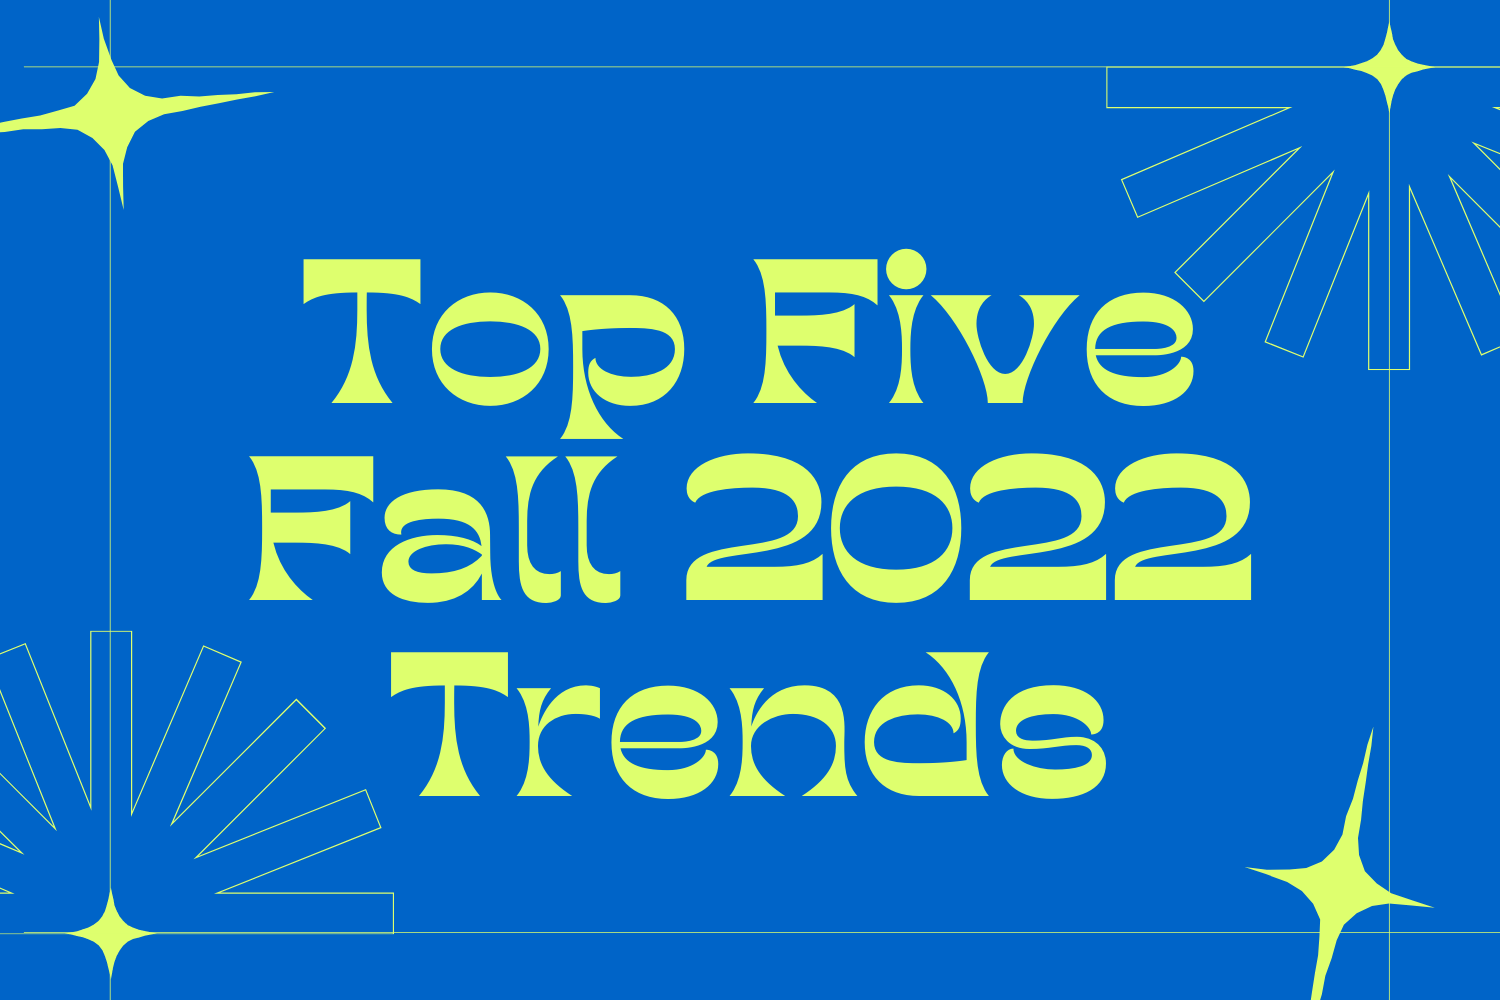 Top 5 Fall 2022 Trends!